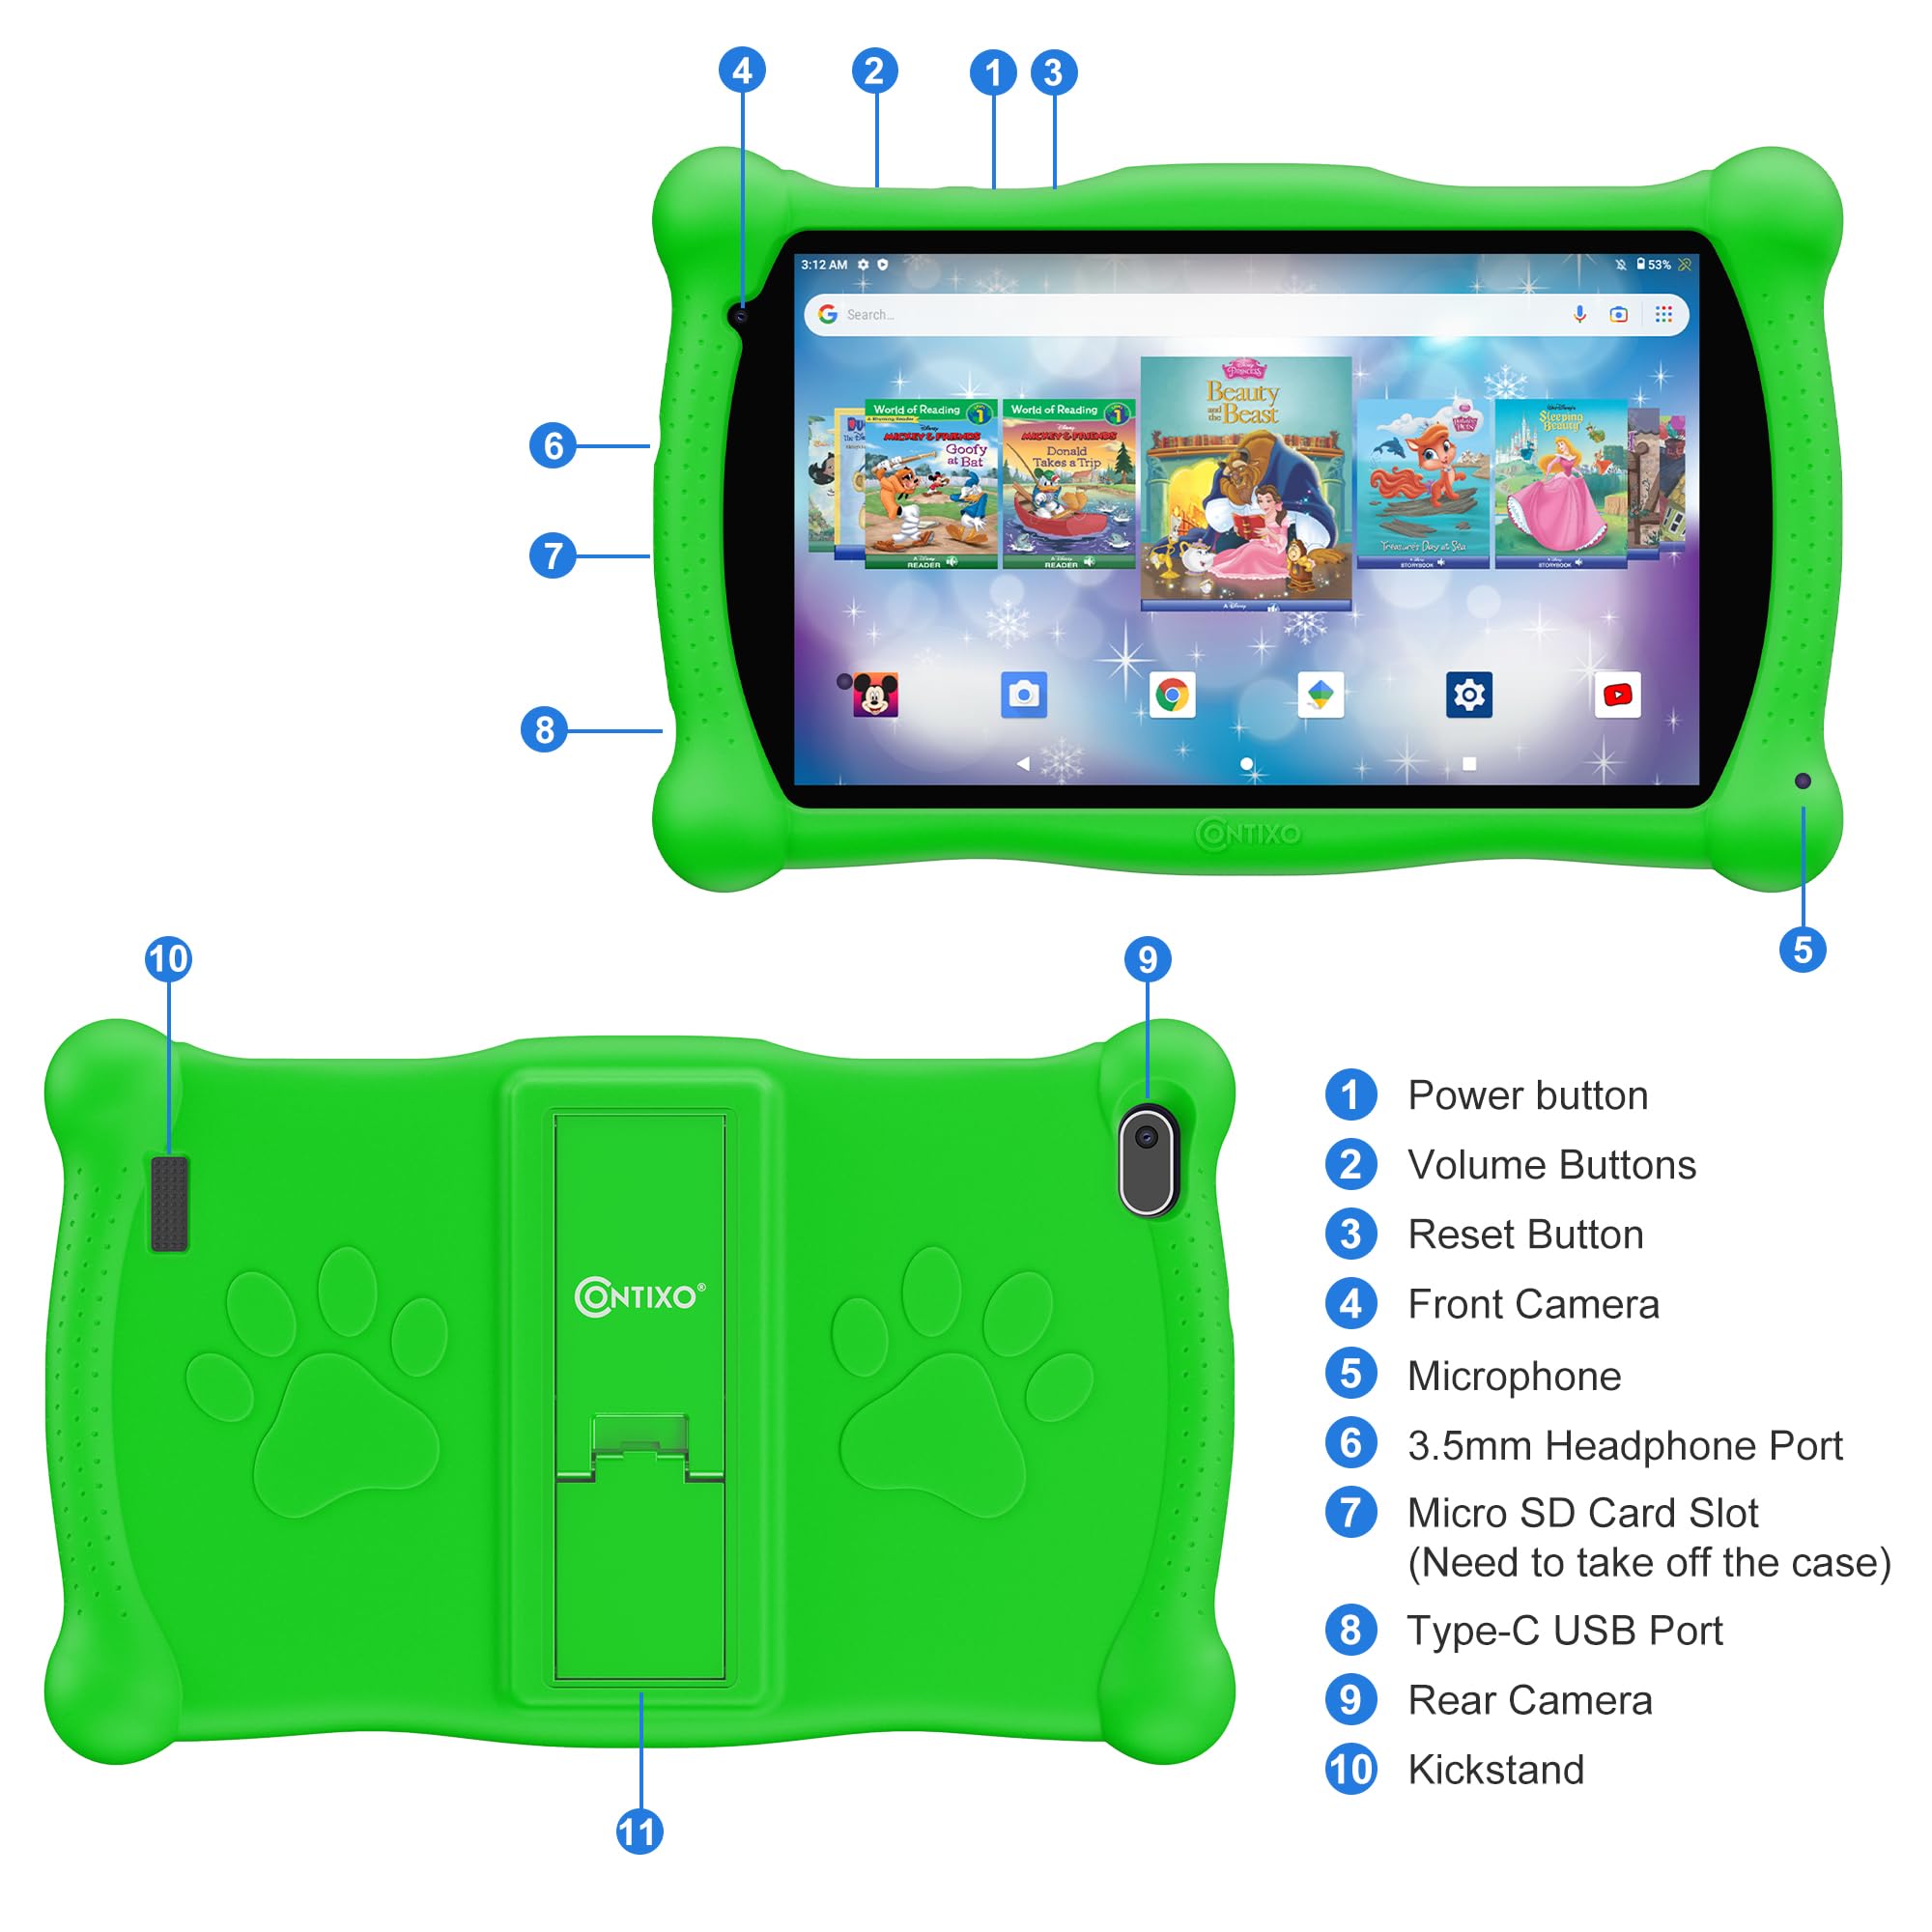 Contixo Kids Tablet V10, 7-inch HD, Ages 3-7, Toddler Tablet with Camera, Parental Control, 32GB,WiFi, Learning Tablet for Children with Teacher's Approved Apps, Kid-Proof Case & Stylus, Green